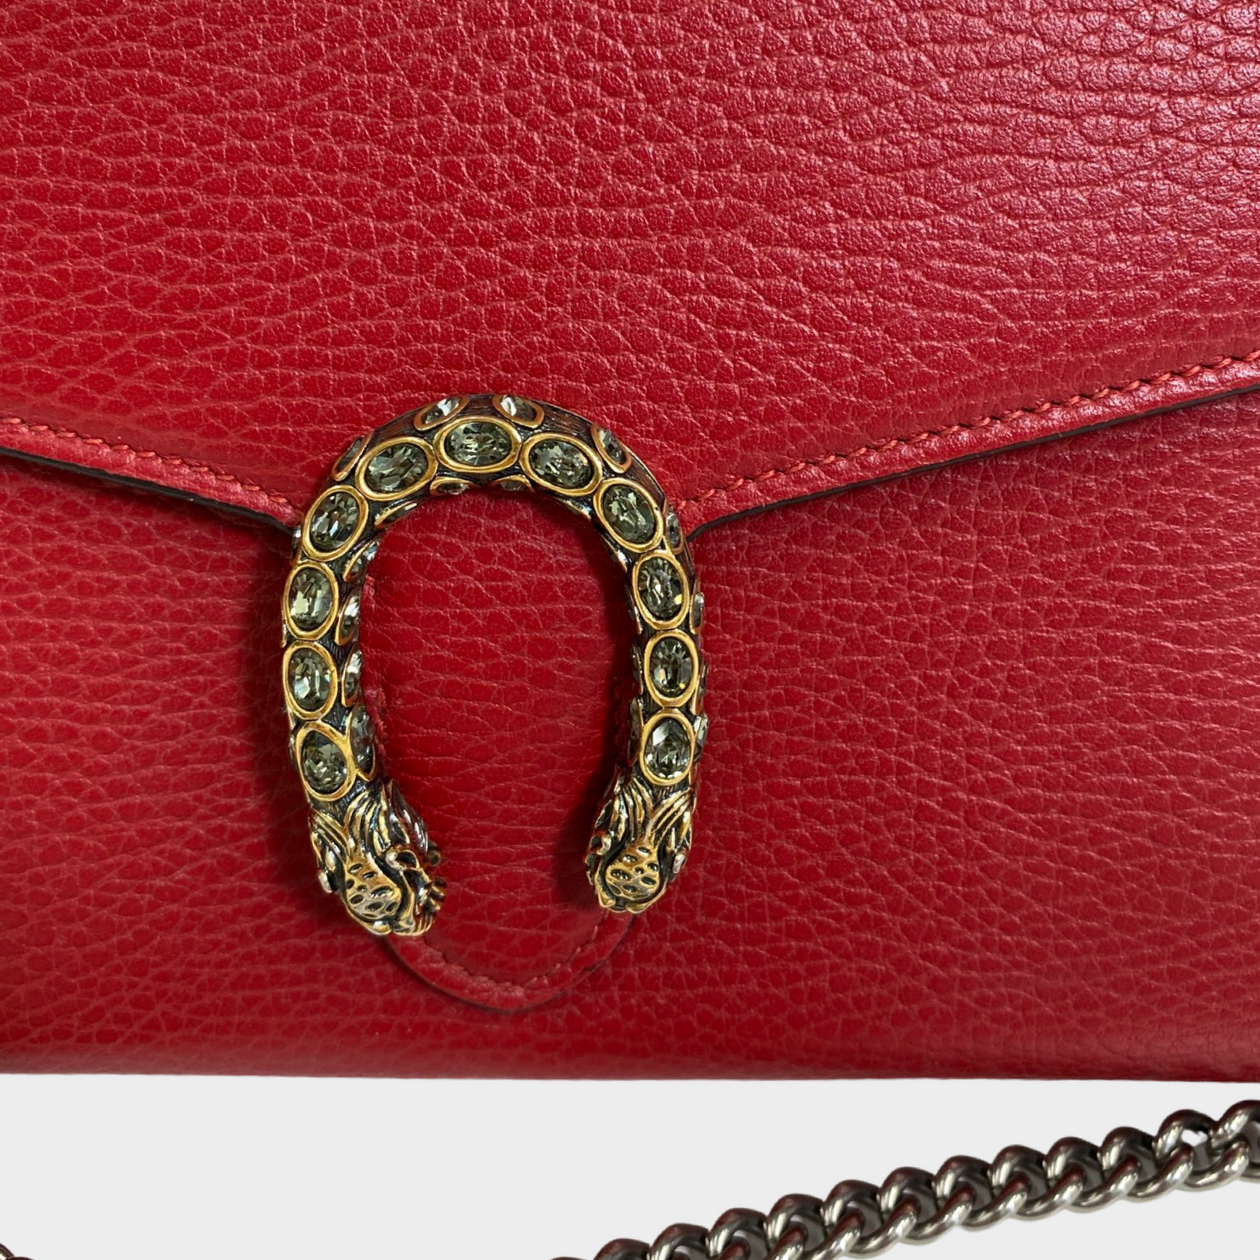 Gucci Dionysus Mini Wallet on Chain Bag WOC Red Leather